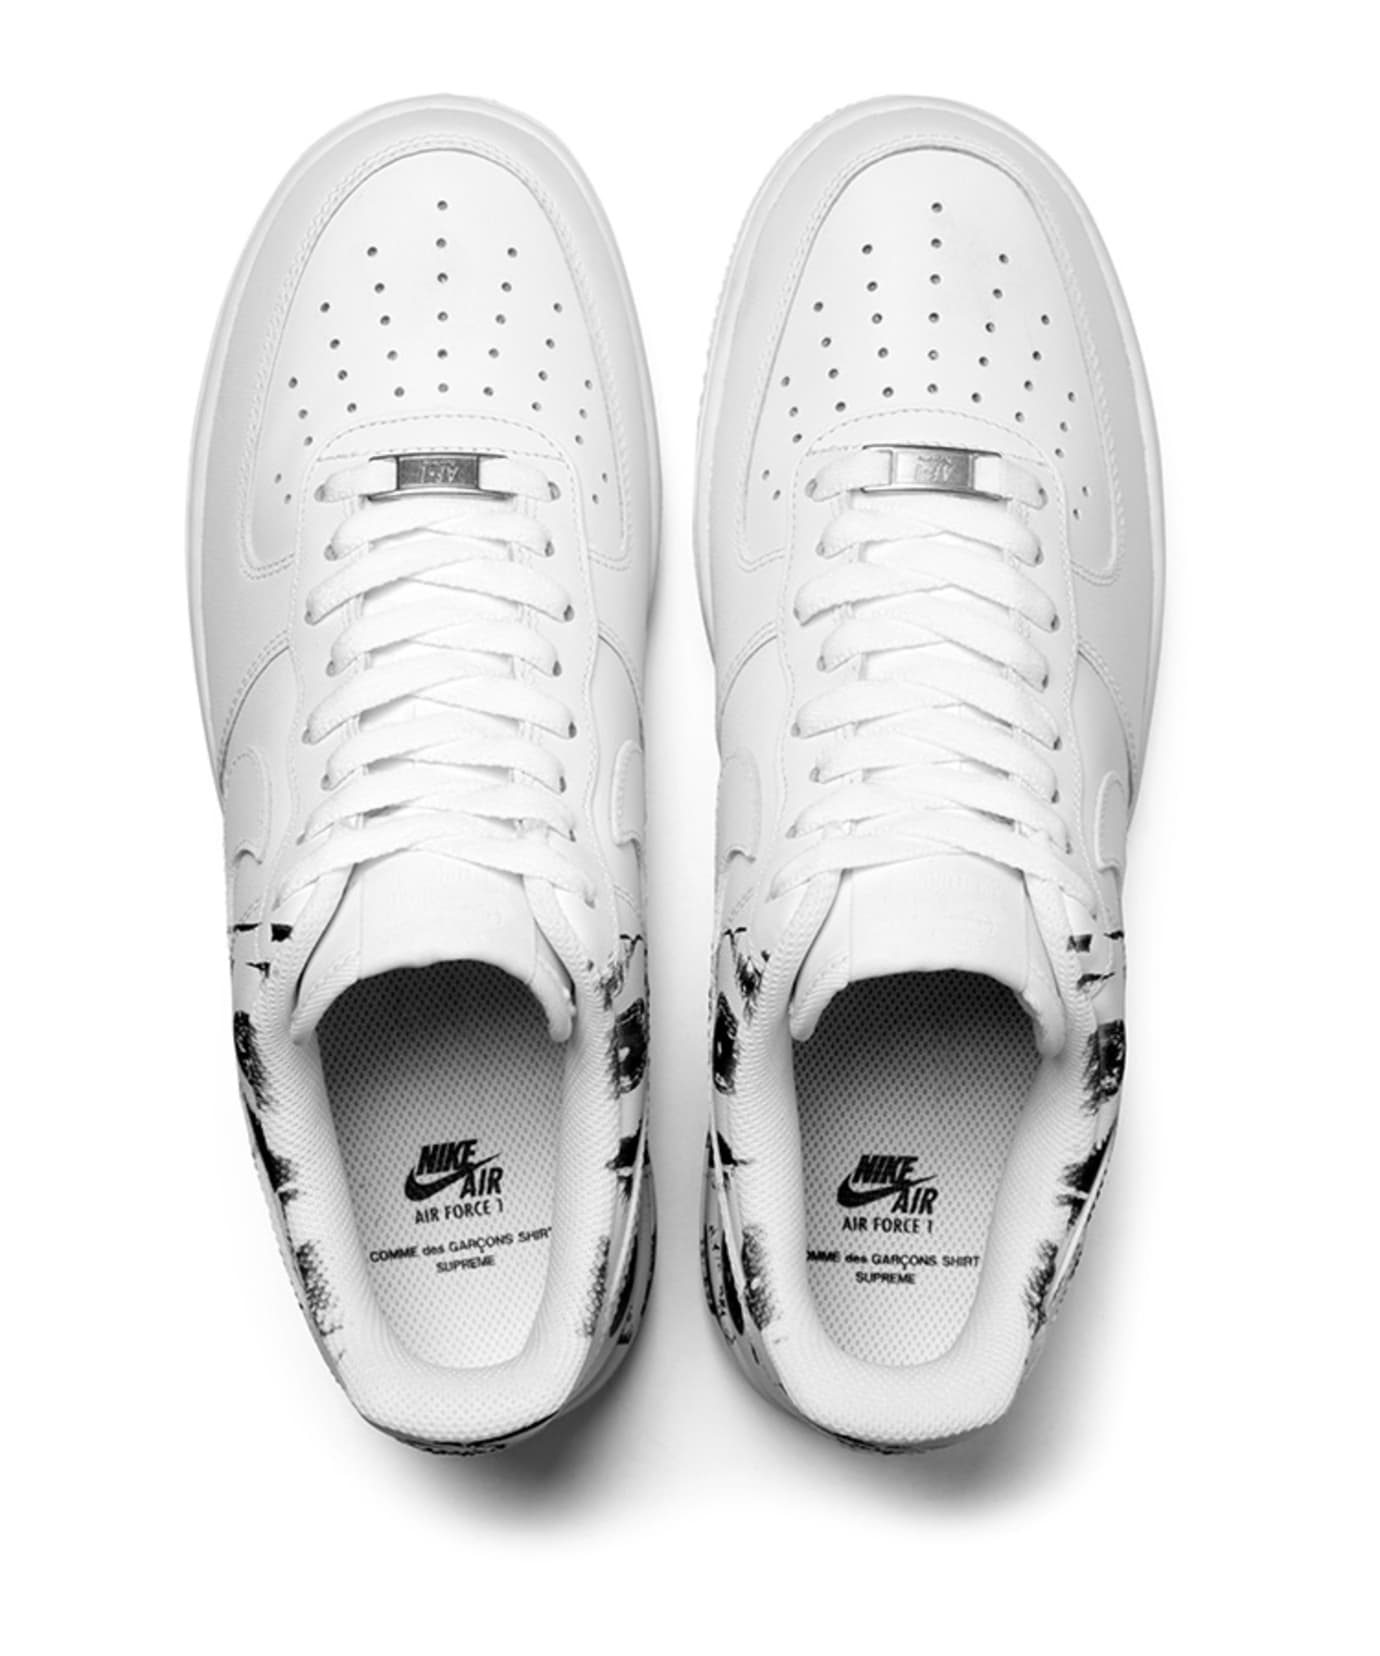 Supreme Des Garcons Nike Air Force Low Release Date | Sole Collector